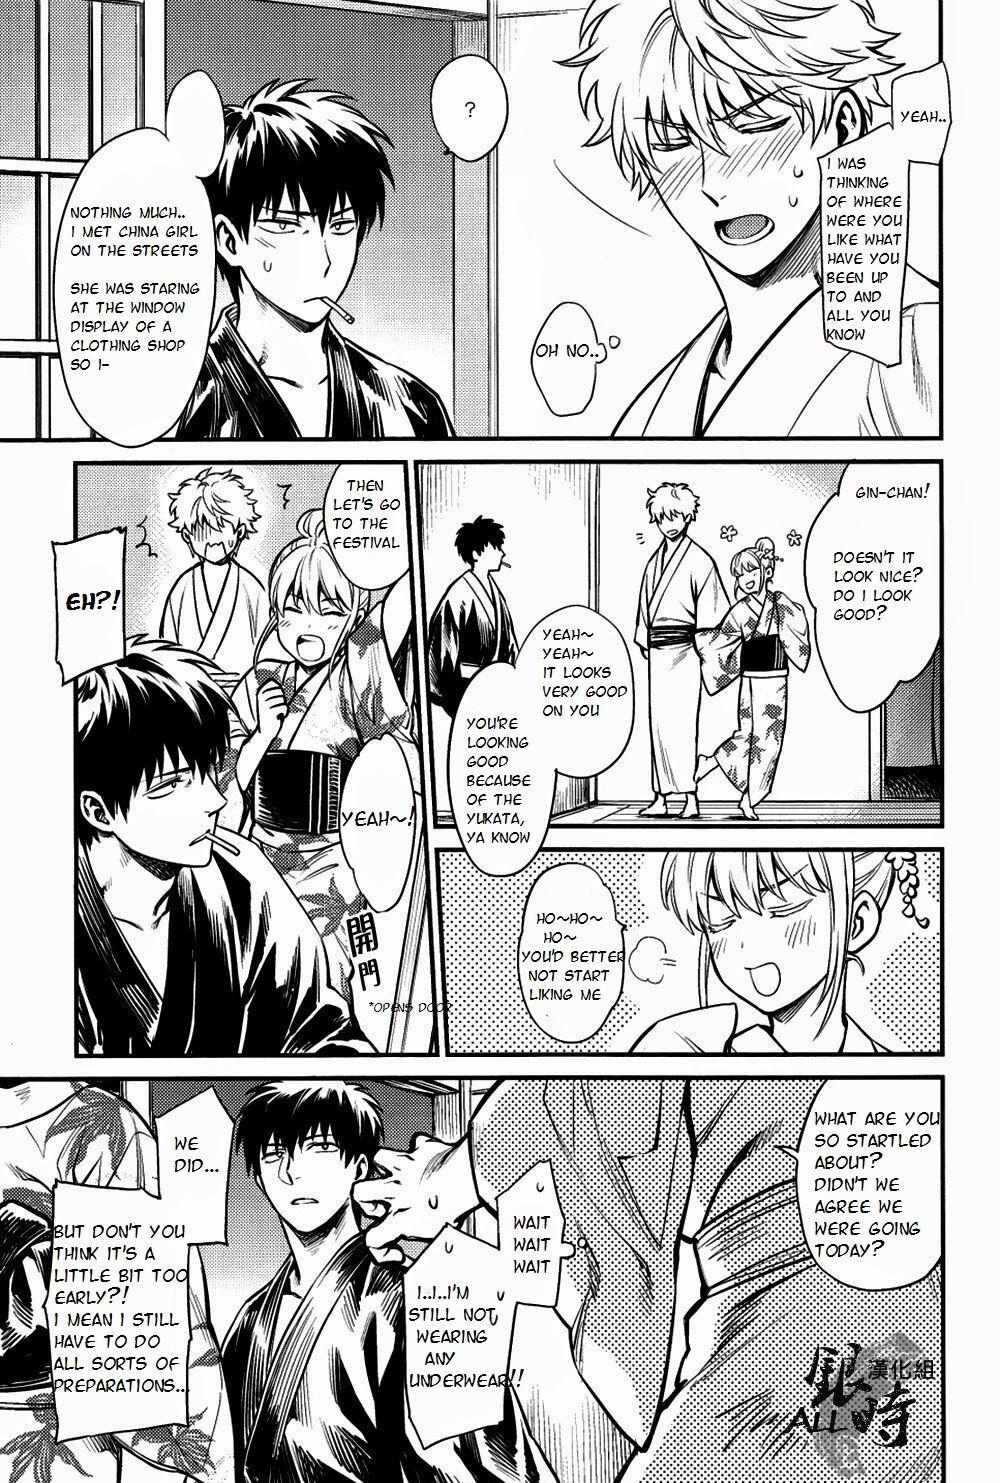 Swinger Please! Gintoki - Gintama And - Page 8